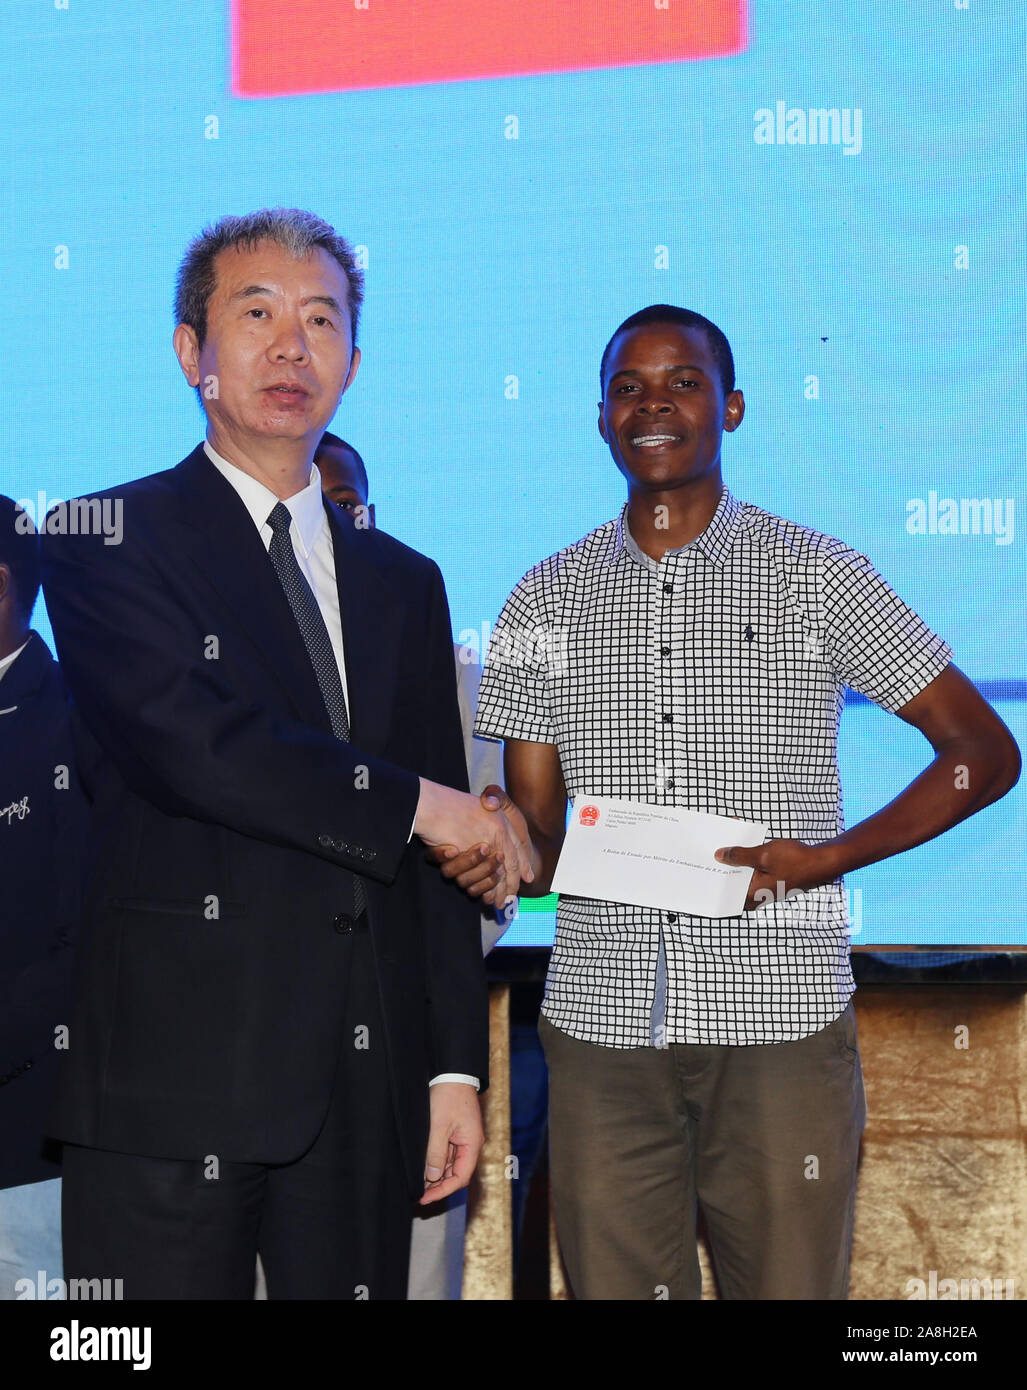 Maputo, Mozambique. 8th Nov, 2019. Chinese Ambassador to Mozambique Su Jian (L) presents the yearly Ambassador Scholarship to a Mozambican student in Maputo, Mozambique, Nov. 8, 2019. Deepened practical cooperation between China and Mozambique will bring more high-quality job opportunities to the southeast African country, said Su Jian at a ceremony to present the yearly Ambassador Scholarship to Mozambican students on Friday. Credit: Nie Zuguo/Xinhua/Alamy Live News Stock Photo